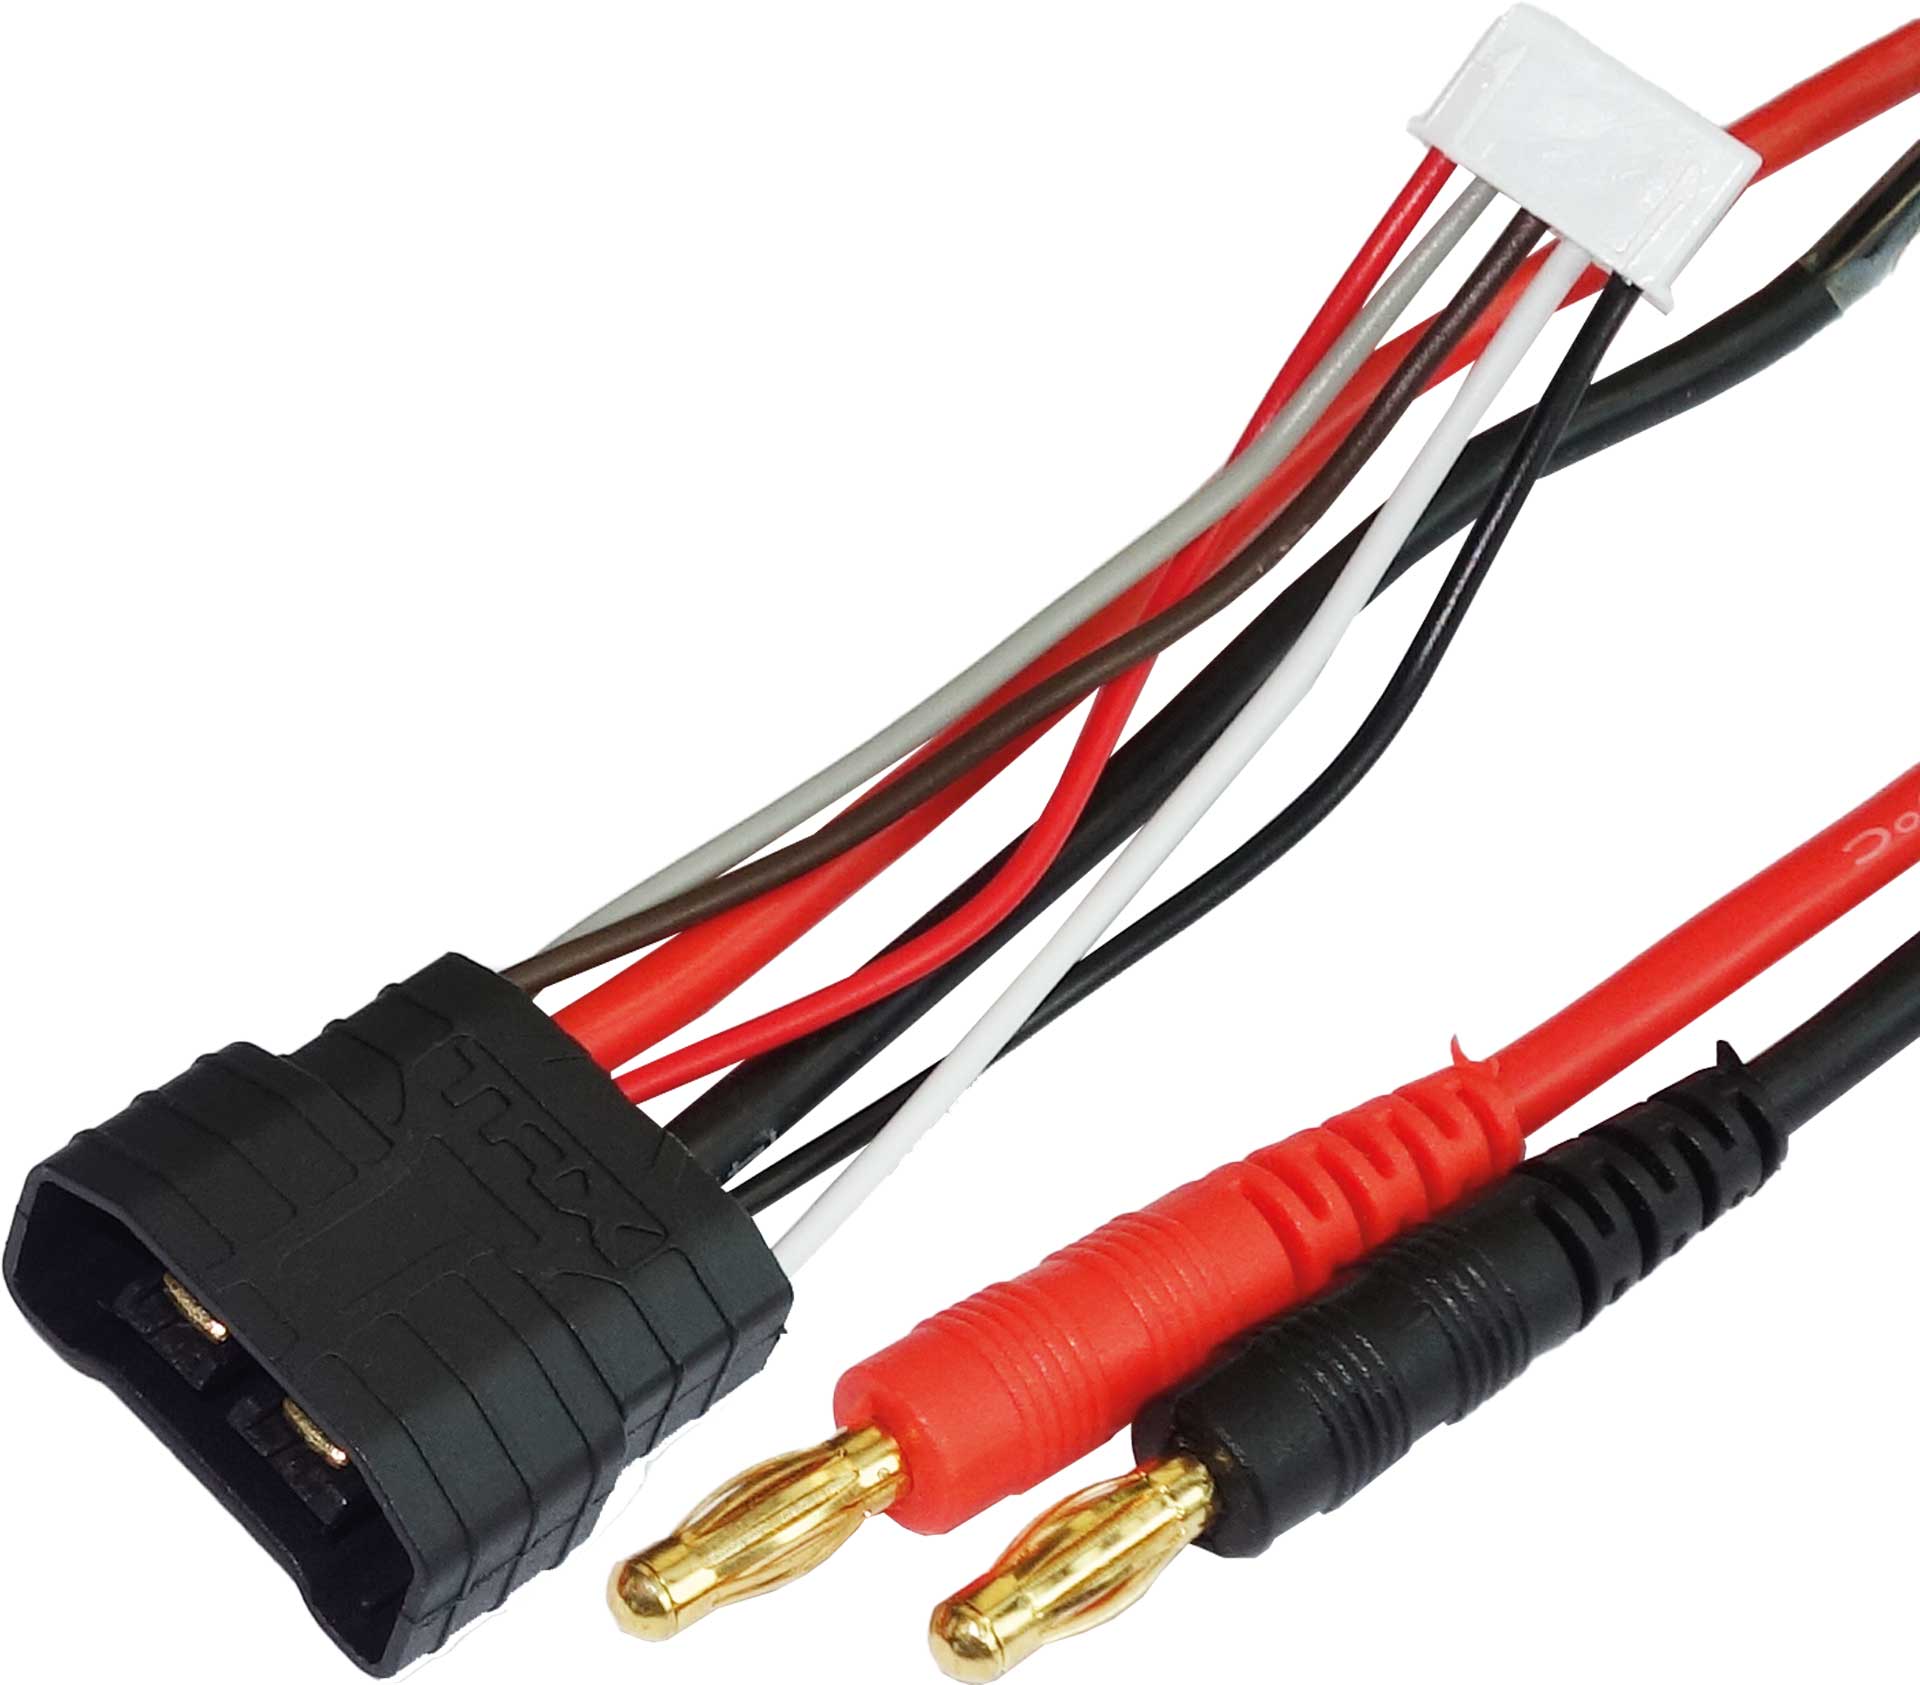 Robbe Modellsport CÂBLE DE CHARGE TRX ID 4SSUR CONTACT OR 4MM 14AWG 300MM